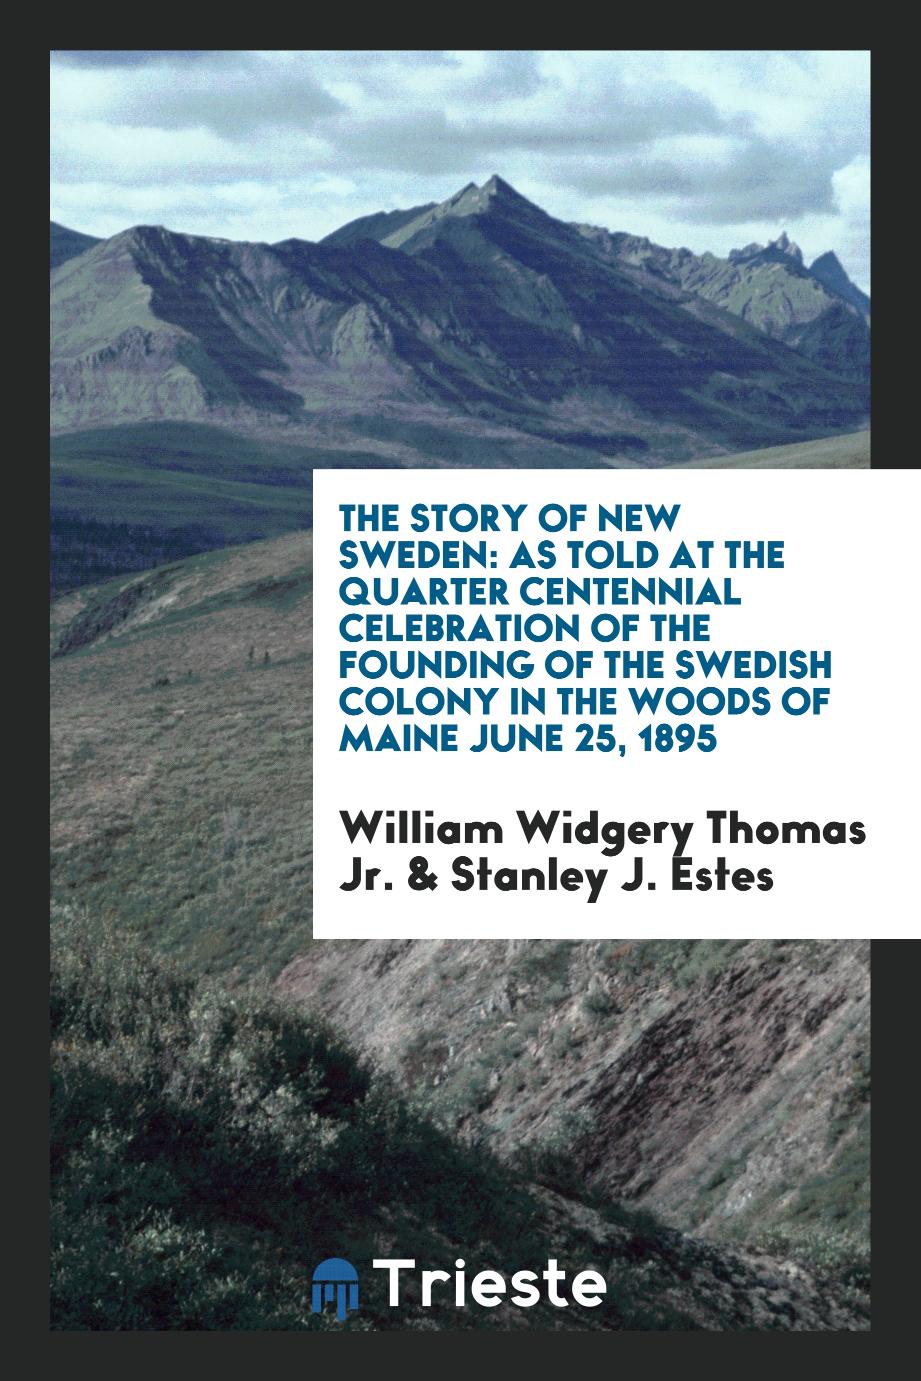 The Story of New Sweden: As Told at the Quarter Centennial Celebration of the Founding of the Swedish Colony in the Woods of Maine June 25, 1895